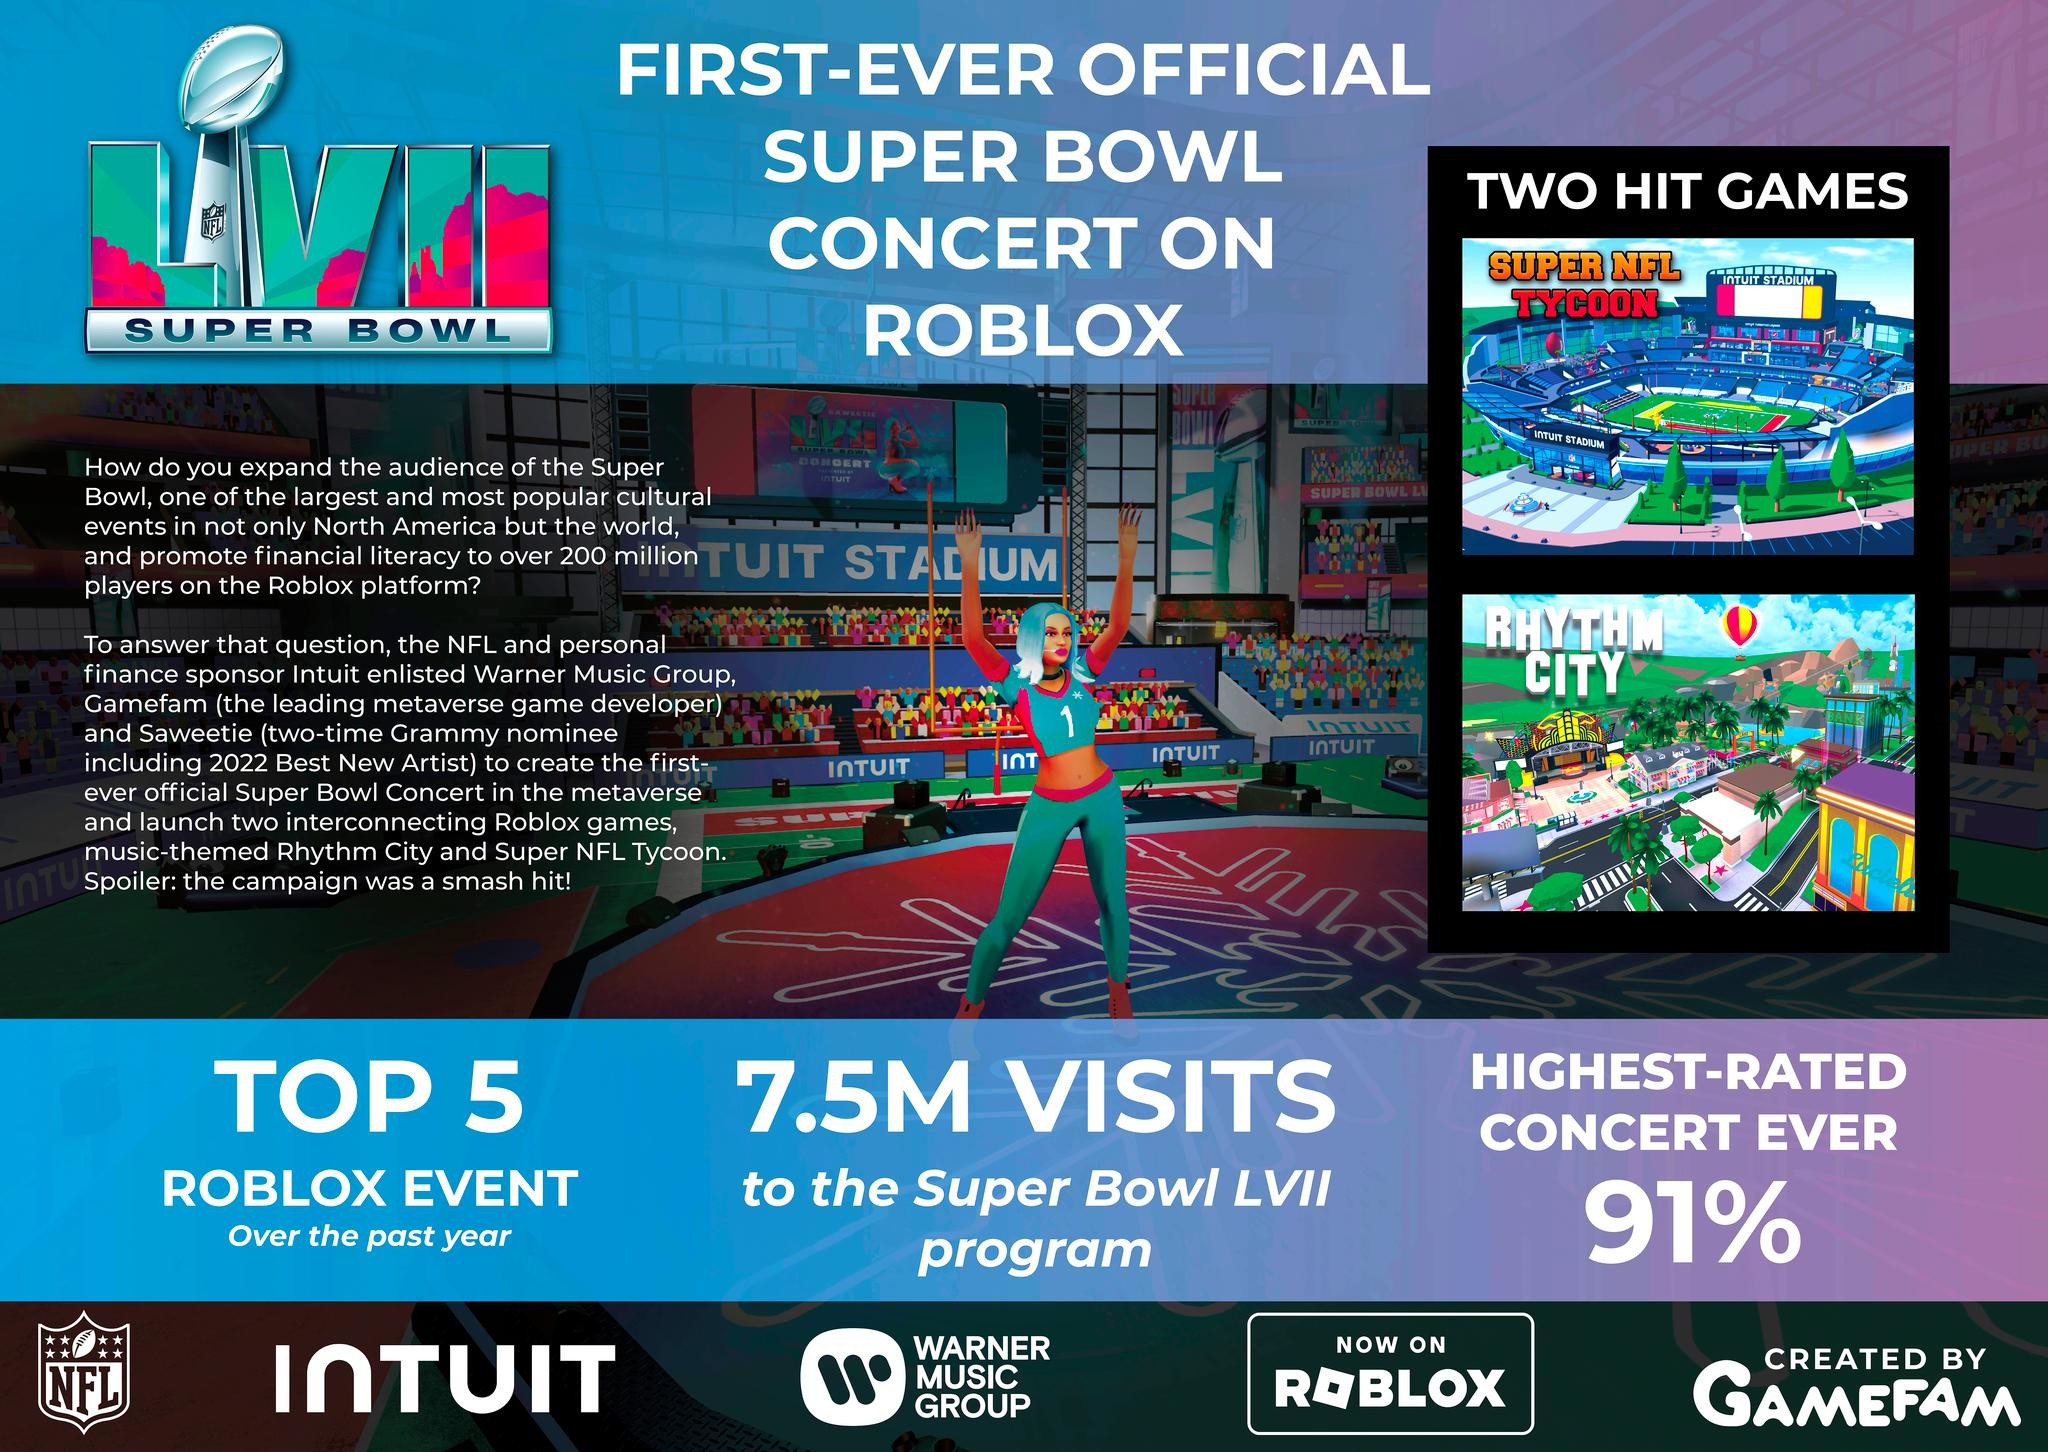 First Super Bowl concert in Roblox launched by WMG, NFL, Intuit and Gamefam